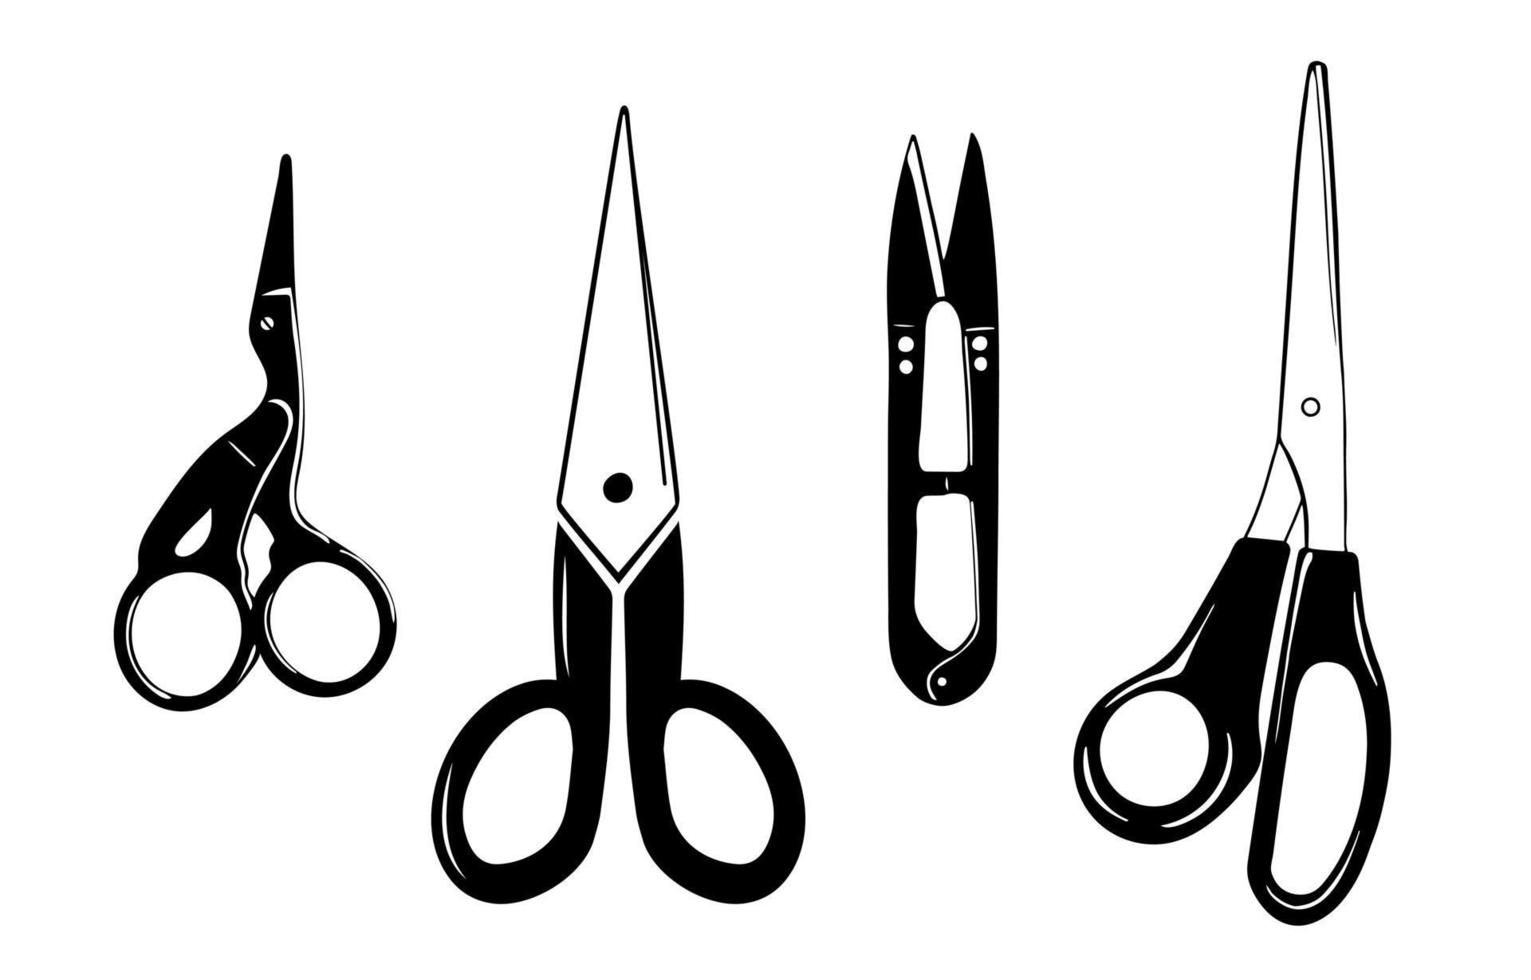 Set of tailor and embroidery scissors. Crane Small Scissors, snipper, fabric scissors isolated on white background. Vector silhouette.